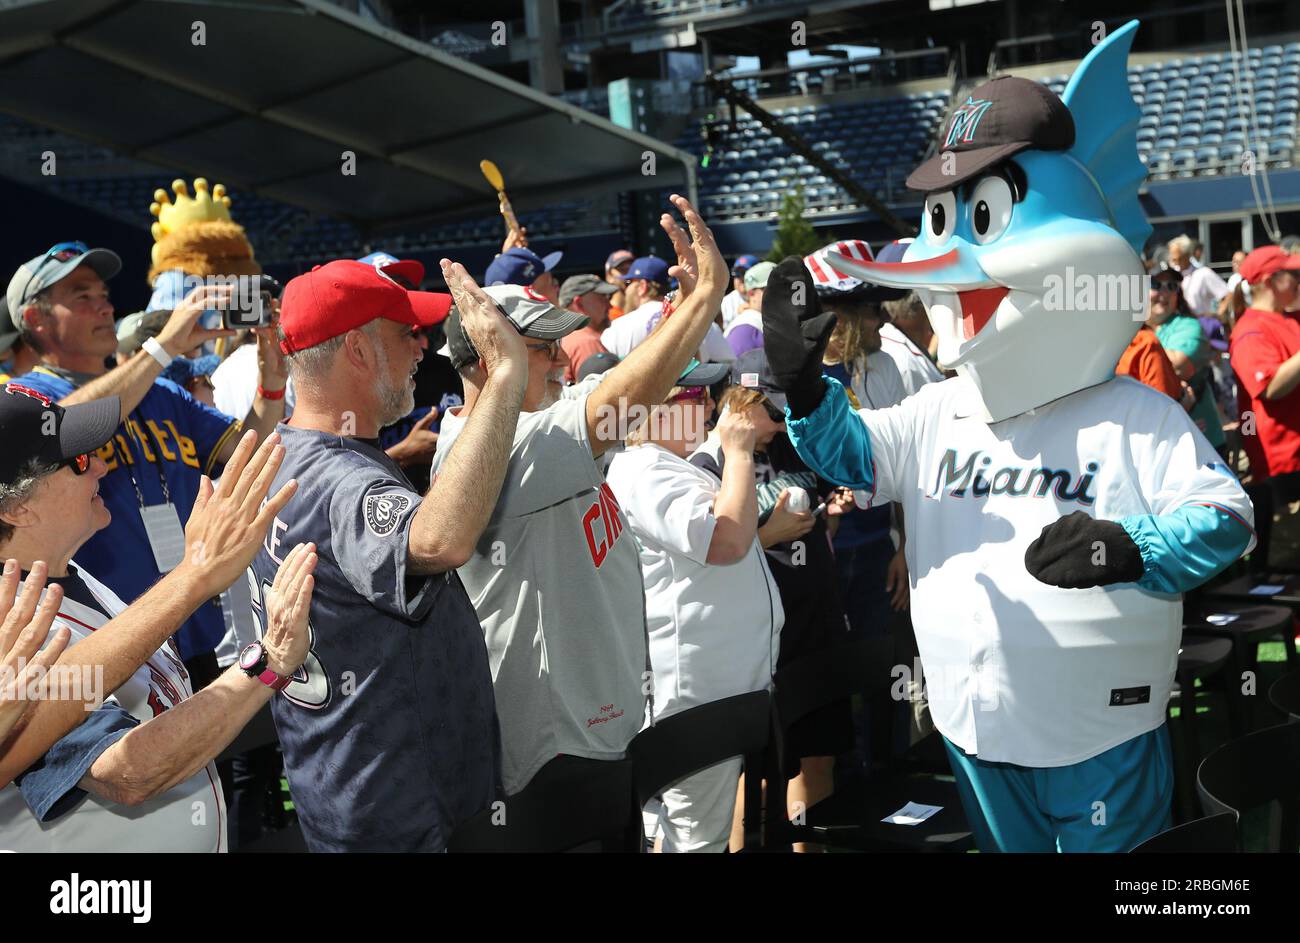 Top 10 myths that MLB fans, media continue to tell about Miami Marlins -  Fish Stripes